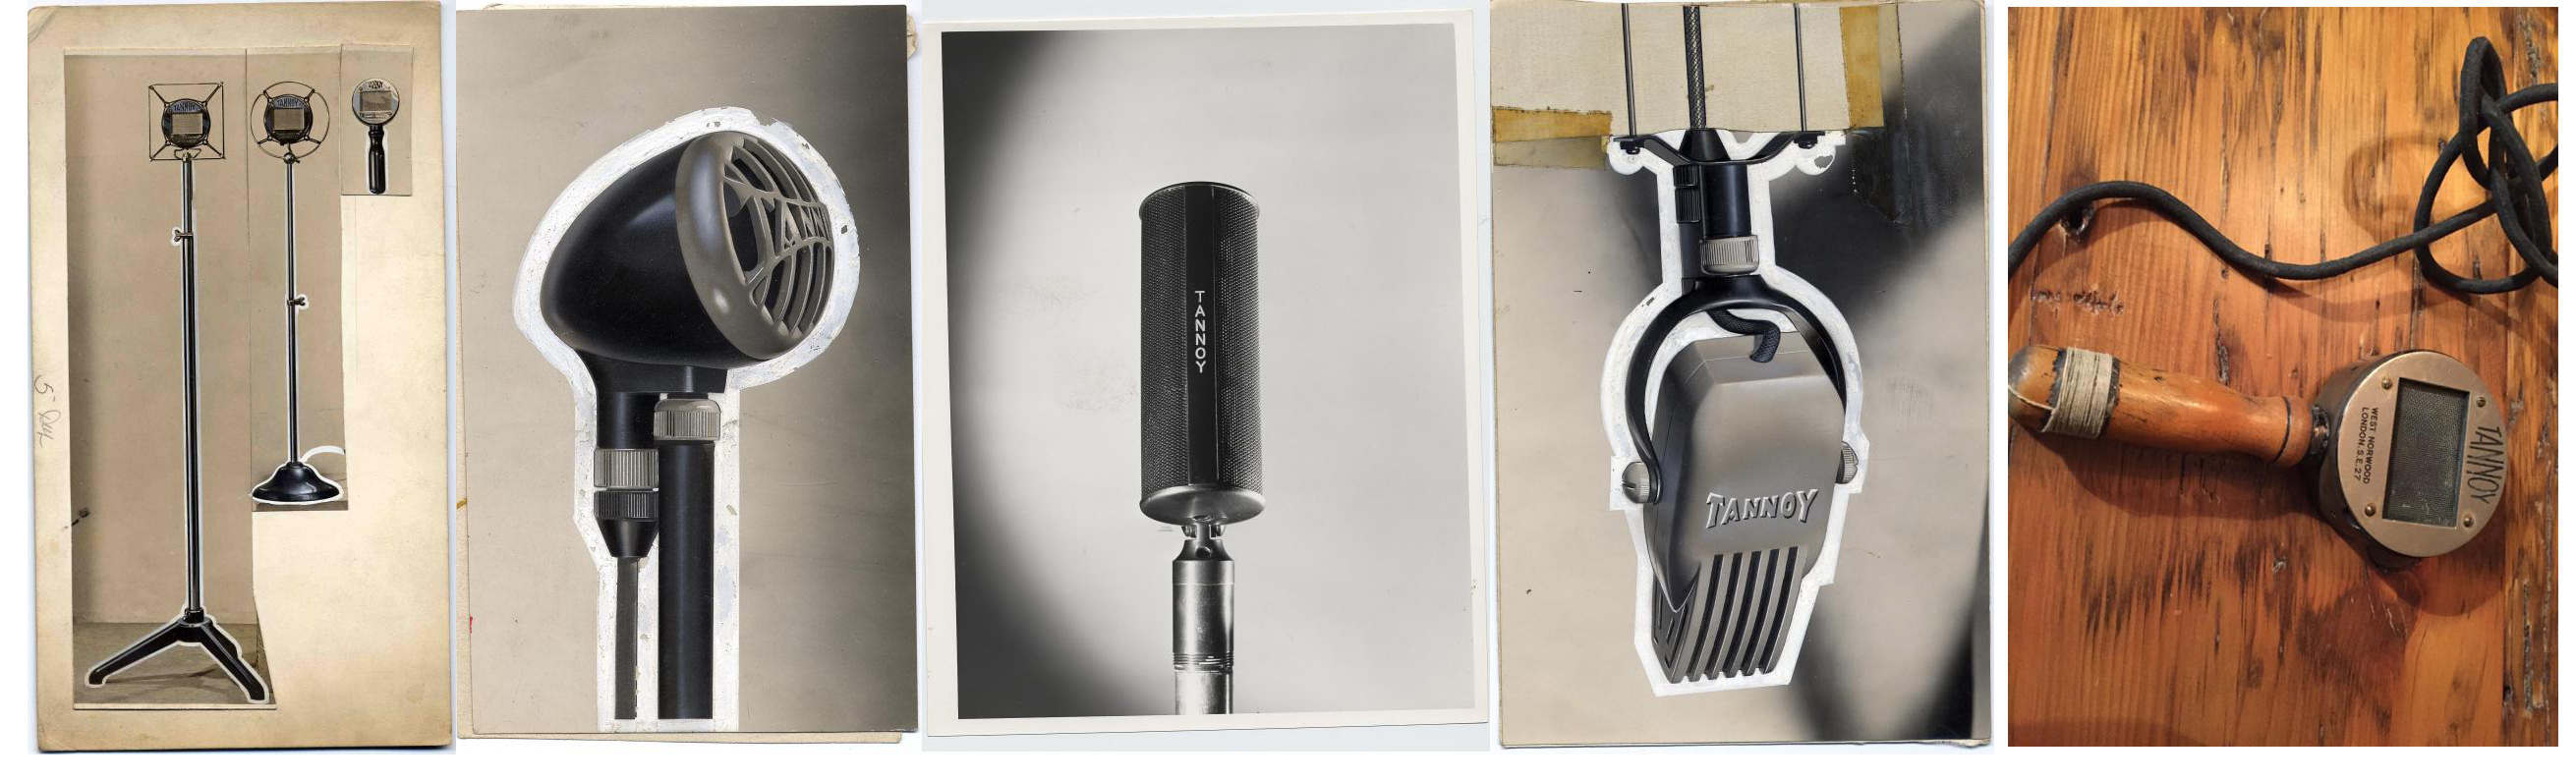 Tannoy historical microphones